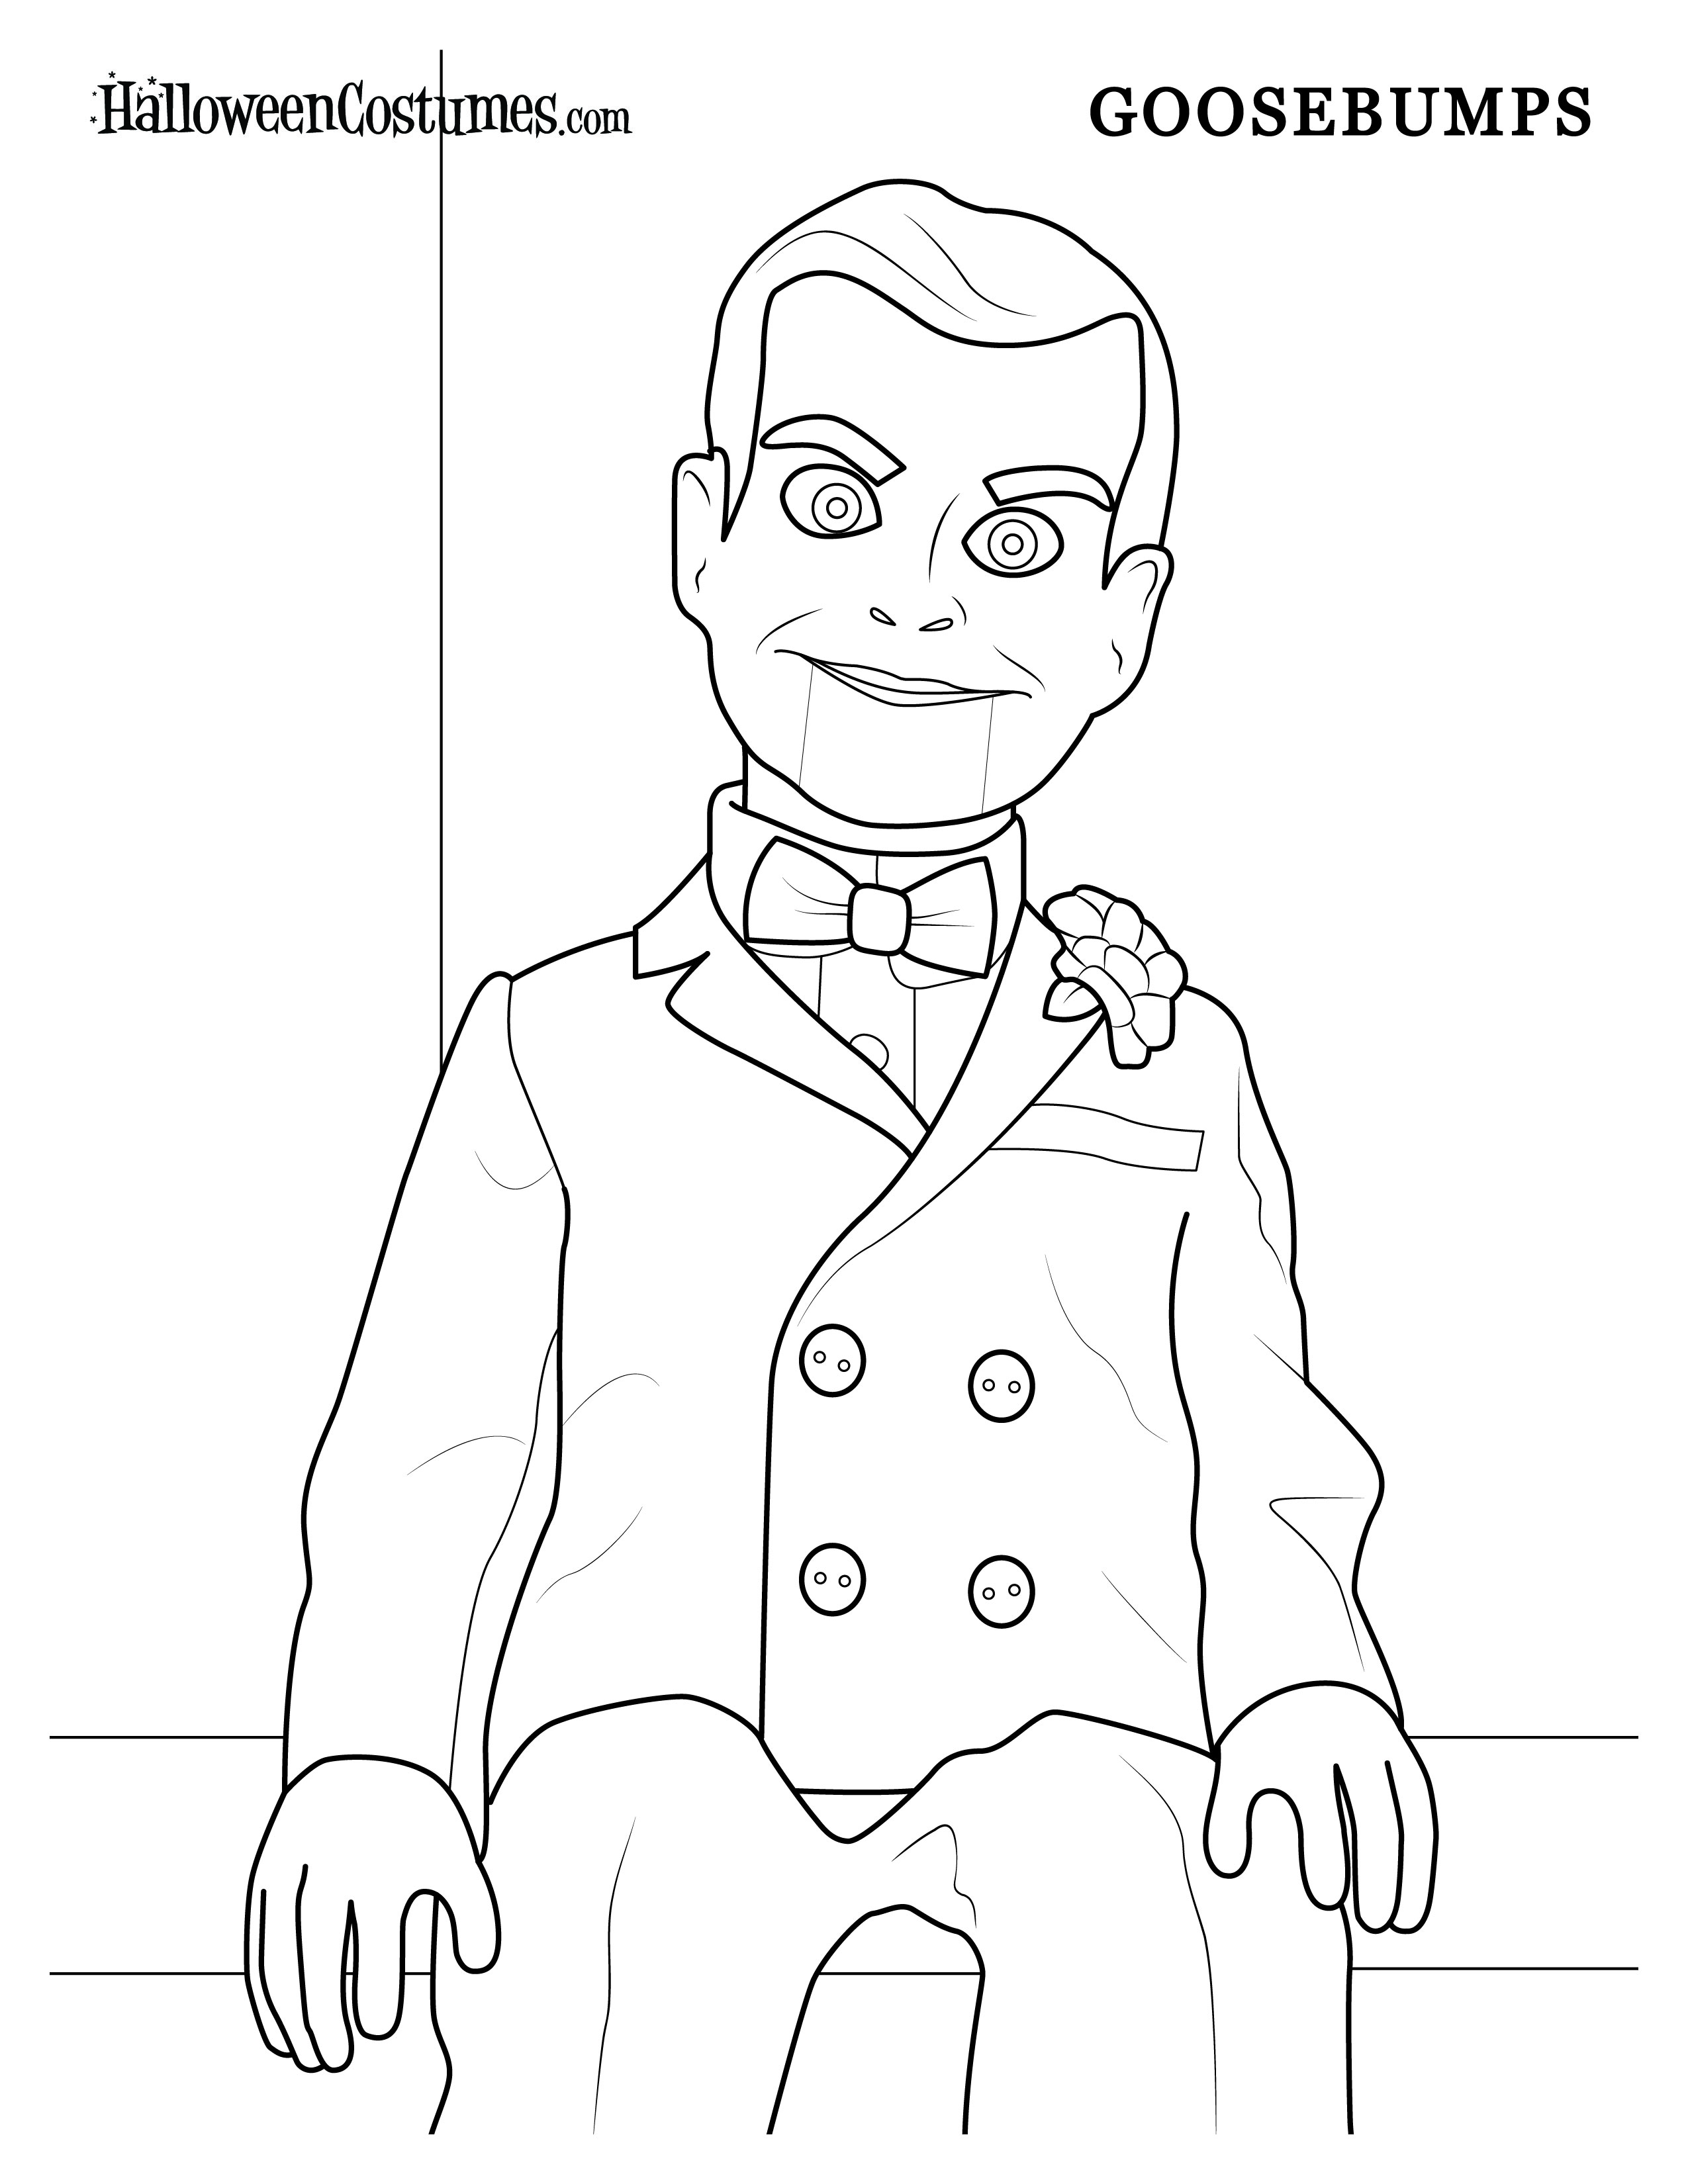 Goosebumps Coloring Pages K Worksheets Halloween Coloring Pages The